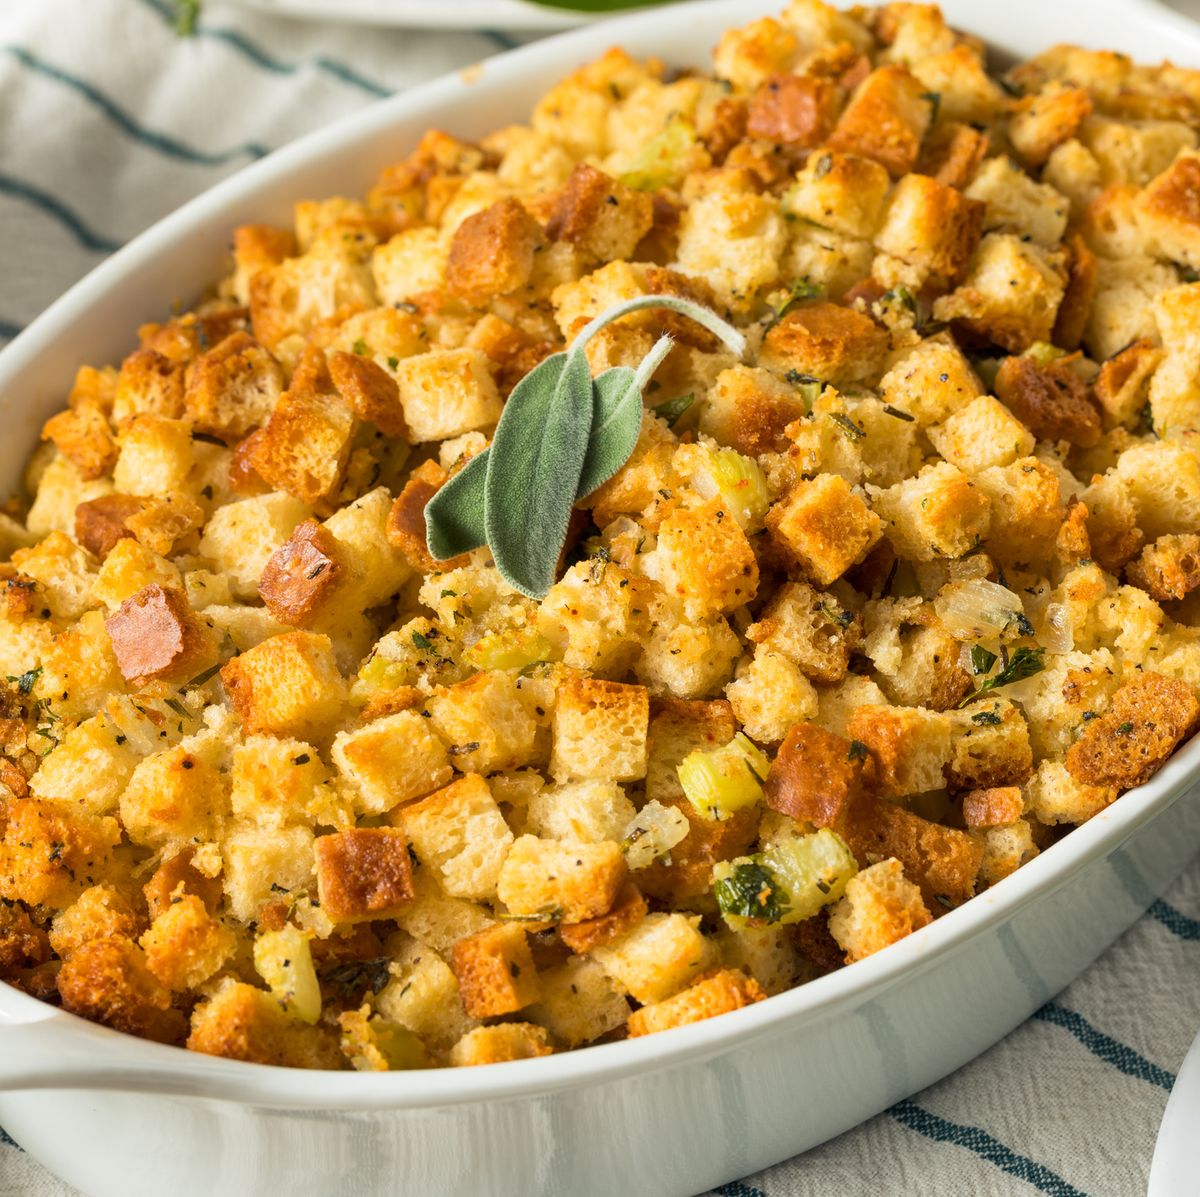 Stuffing And Dressing Differences - Stuffing vs. Dressing